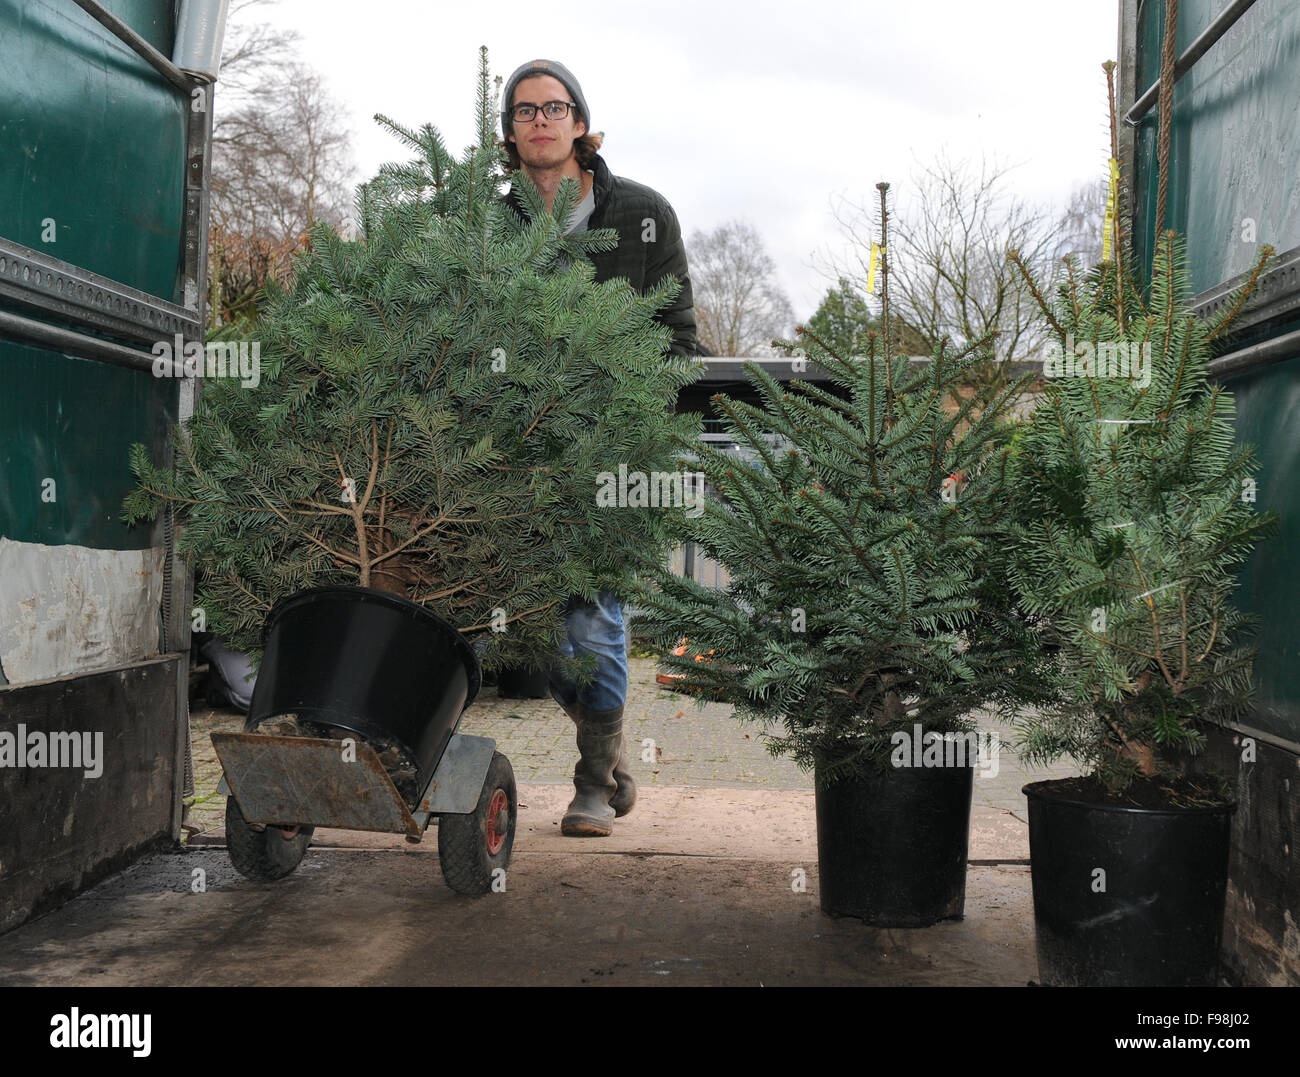 Rastede, Germany. 04th Dec, 2015. Kersten Scholz of the Scholz tree nursery delivers a Christmas tree to a customer in Rastede, Germany, 04 December 2015. The tree nursery rents out the potted trees. After the holiday season the trees are collected and replanted to make the Christmas tree business more sustainable. Photo: Ingo Wagner/dpa/Alamy Live News Stock Photo